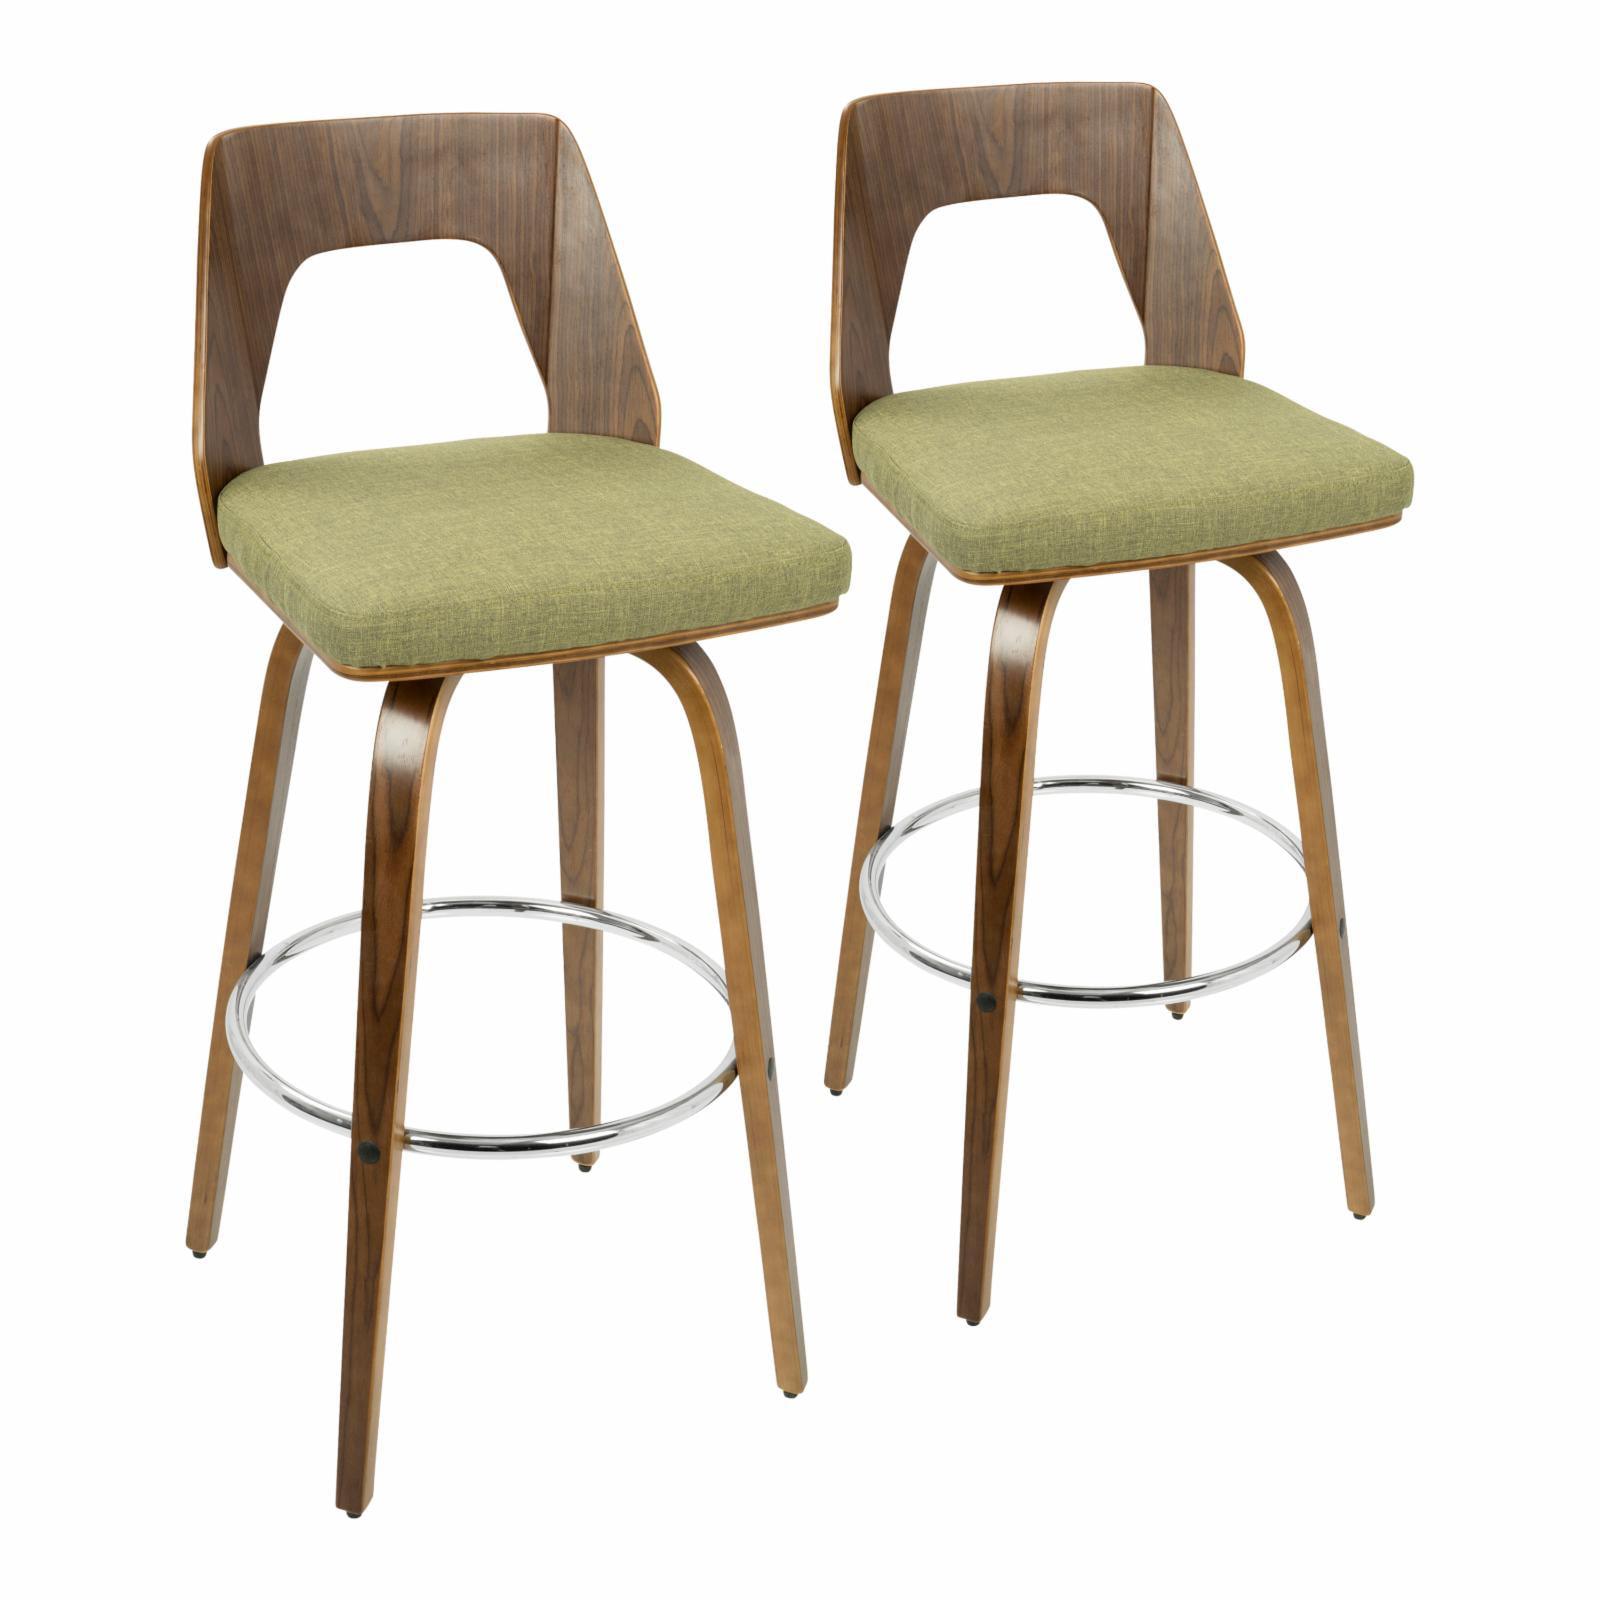 Walnut and Green Fabric Swivel Barstool with Chrome Accents - Set of 2